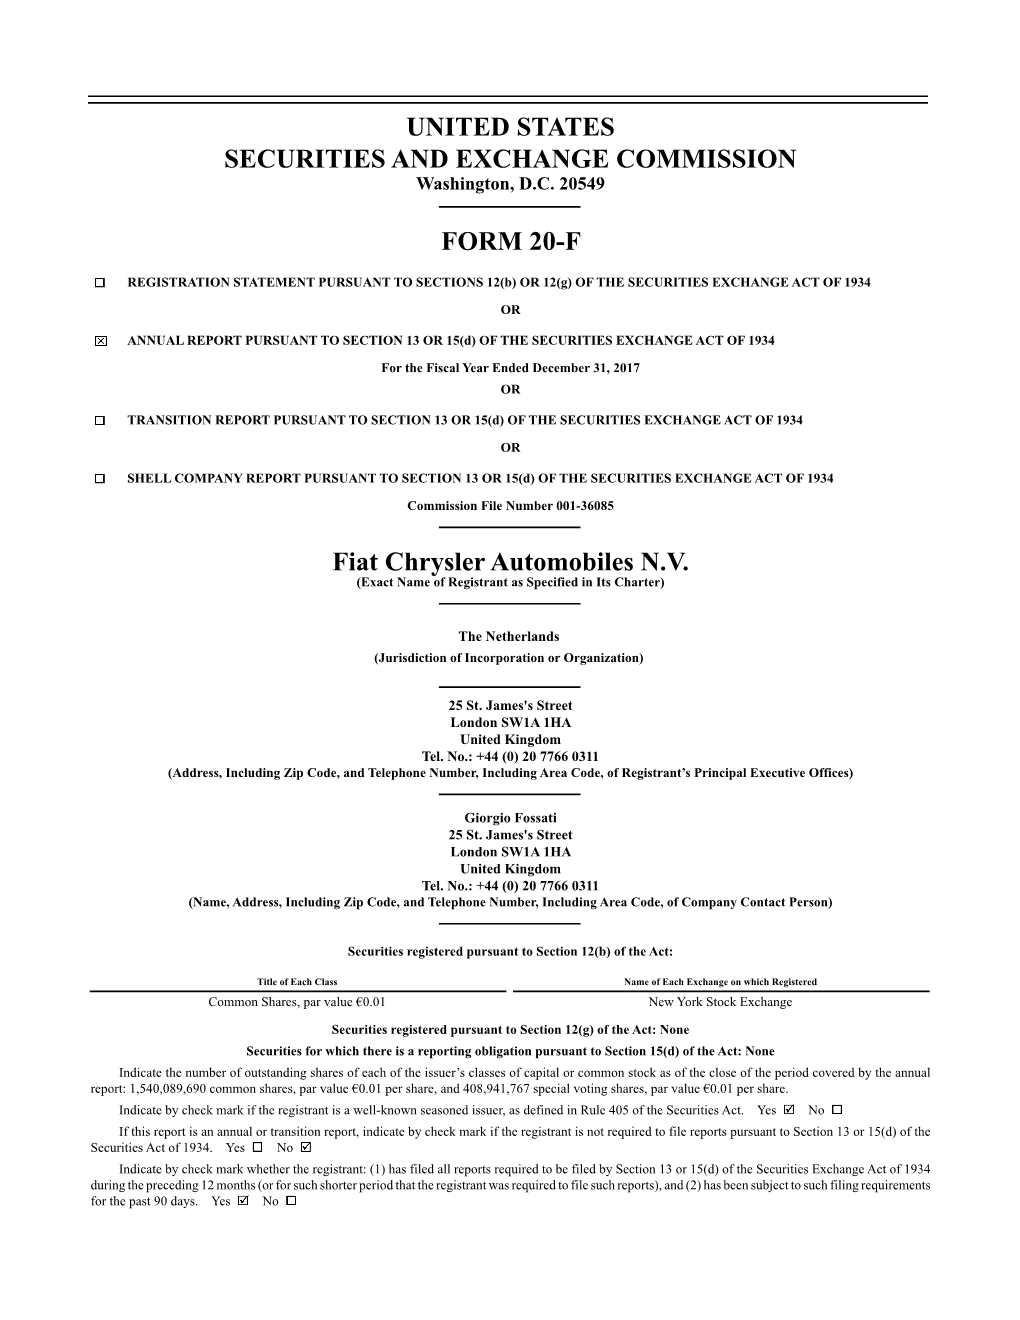 UNITED STATES SECURITIES and EXCHANGE COMMISSION FORM 20-F Fiat Chrysler Automobiles N.V